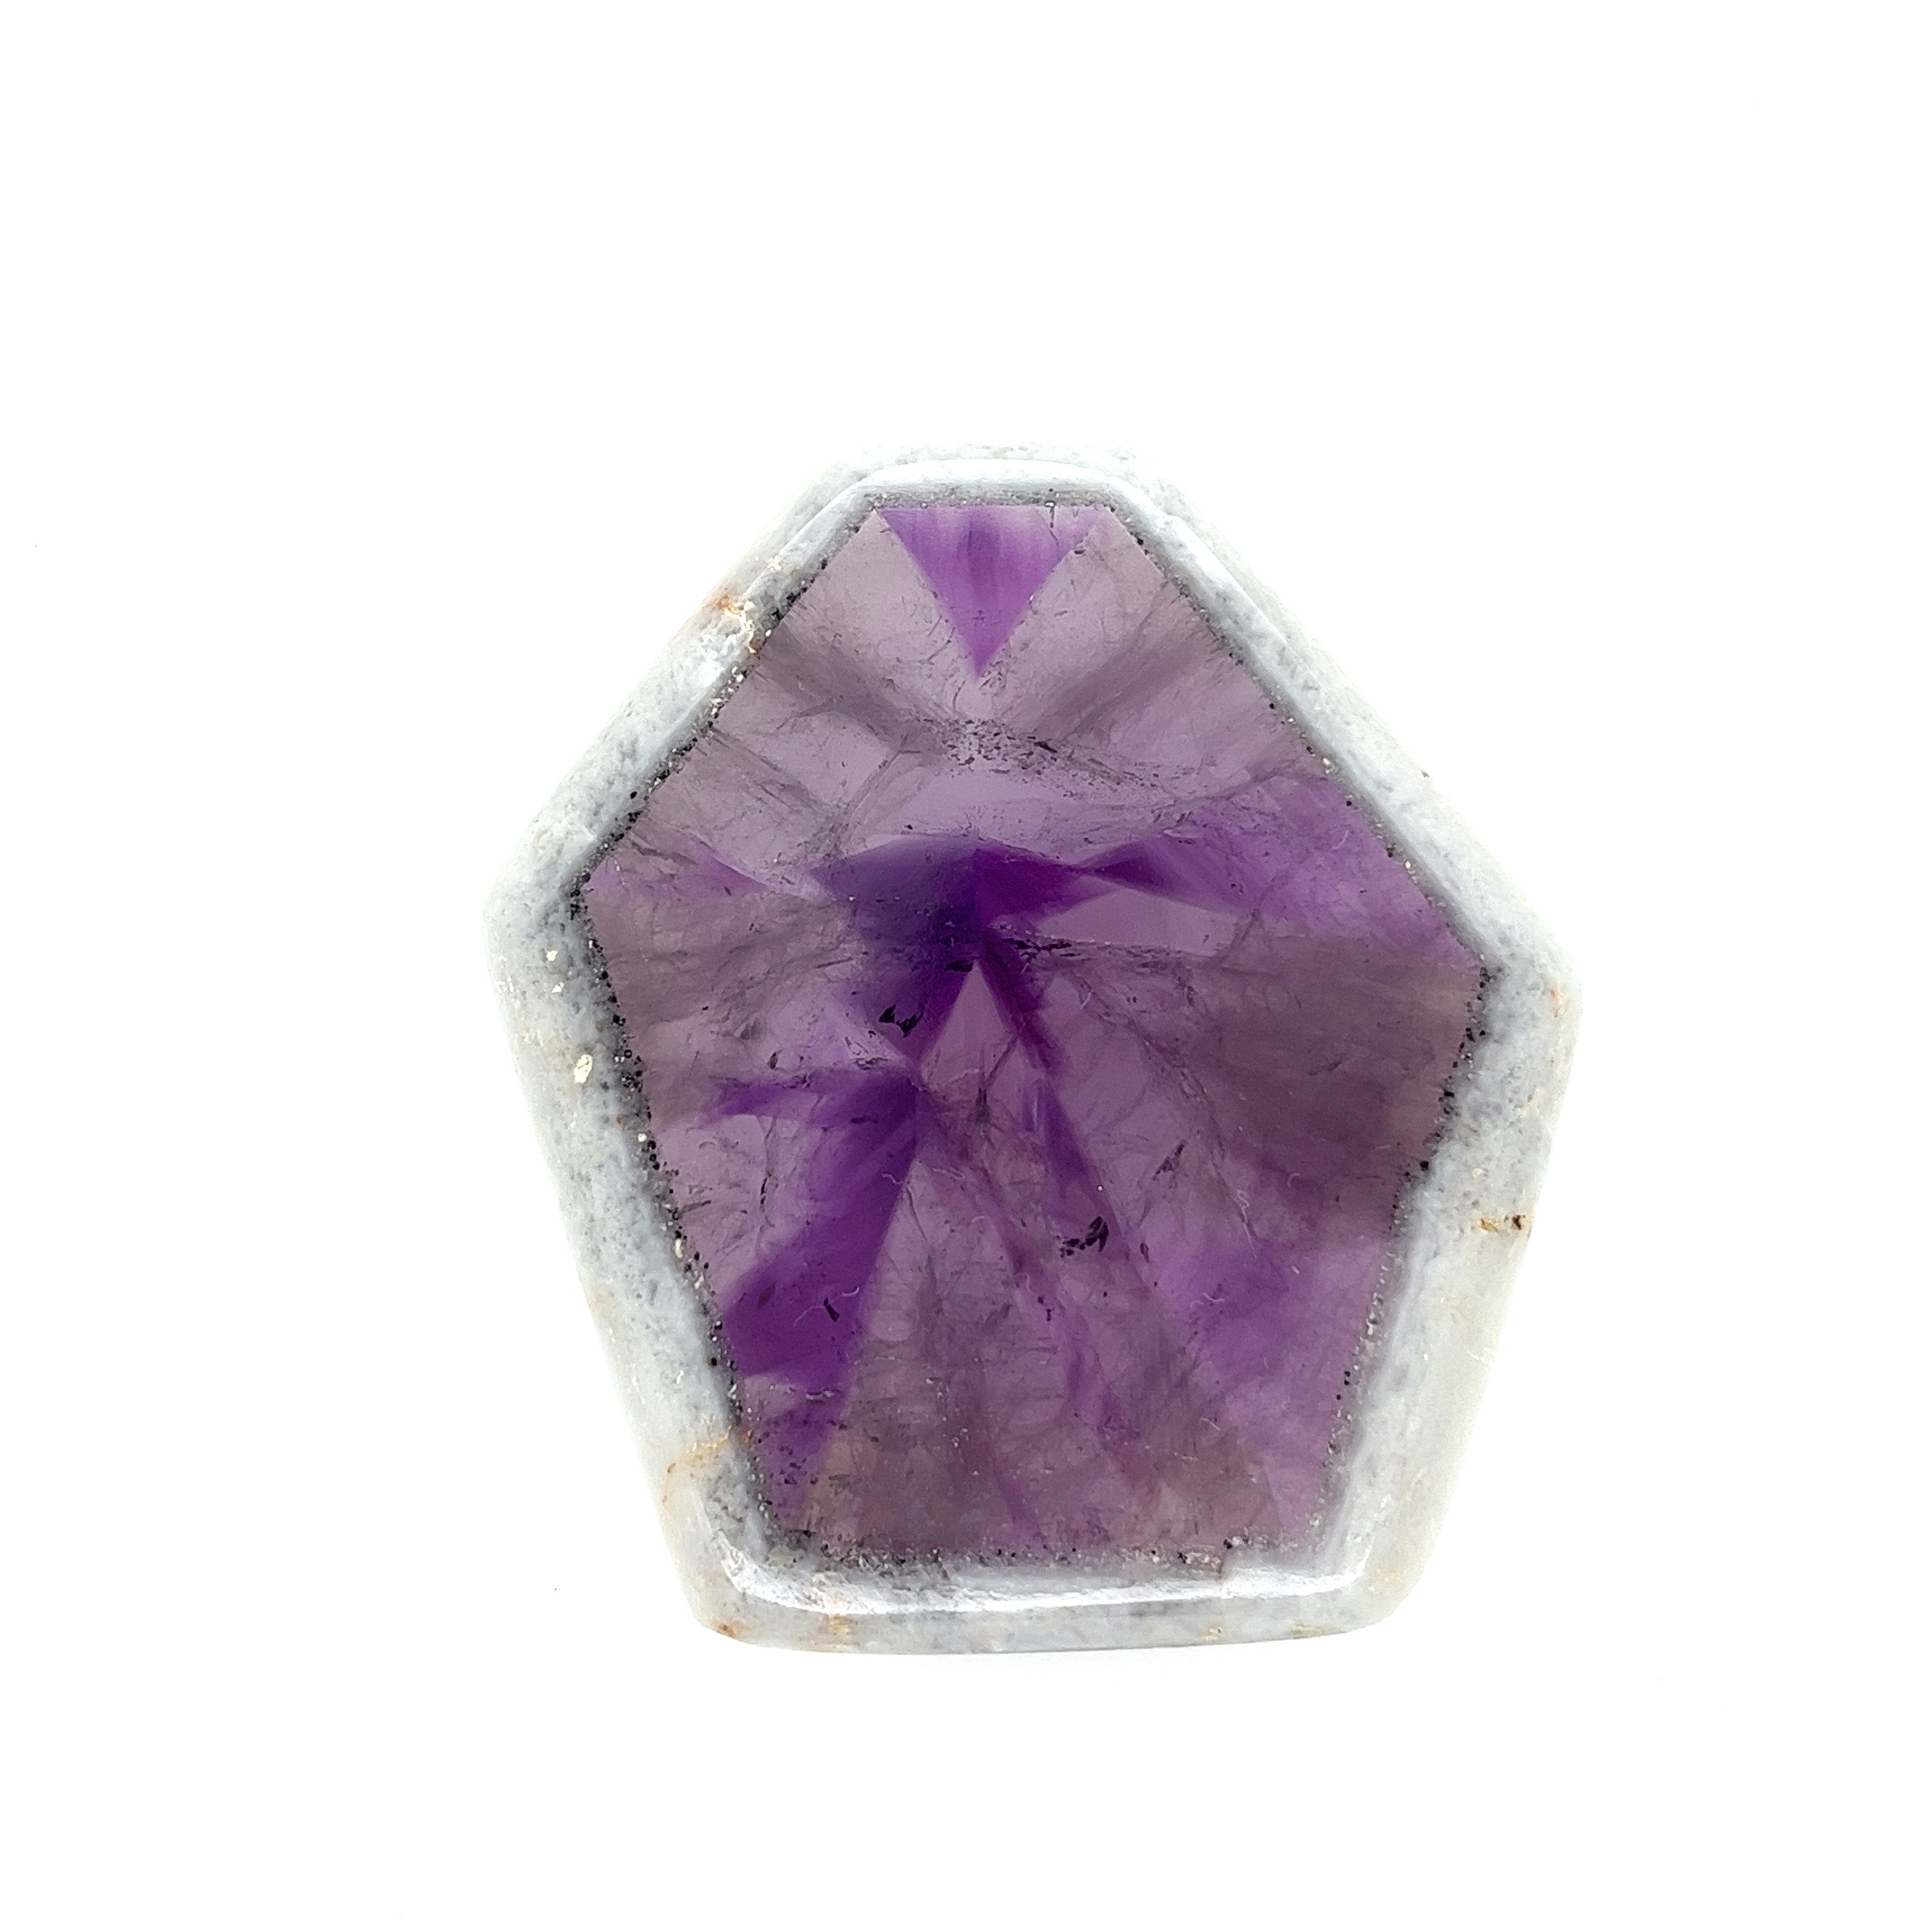 Trapiche Amethyst; Natural Untreated India Amethyst Slice, 31grams - Mark Oliver Gems